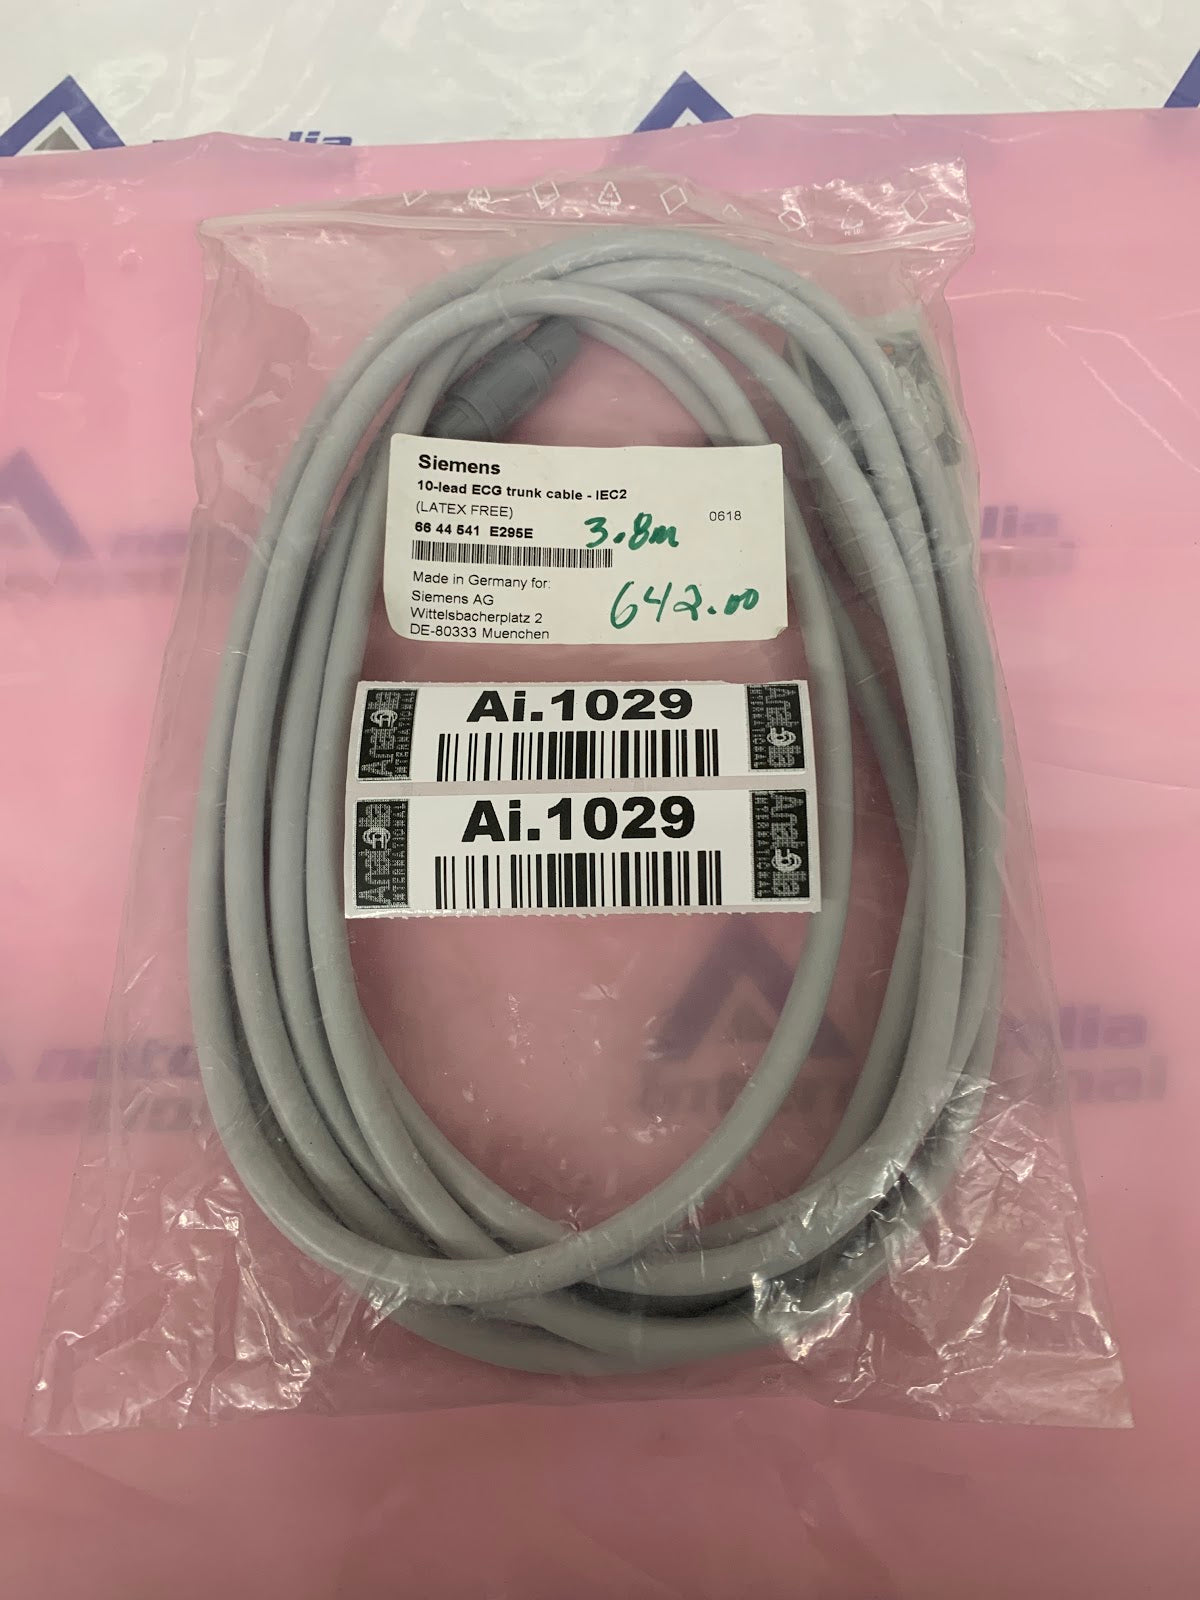 Siemens 10-lead ECG trunk cable - IEC2 (LATEX FREE) For Siemens P/N:68 44 641. Pulled from functioning Equipment, contact for more info.